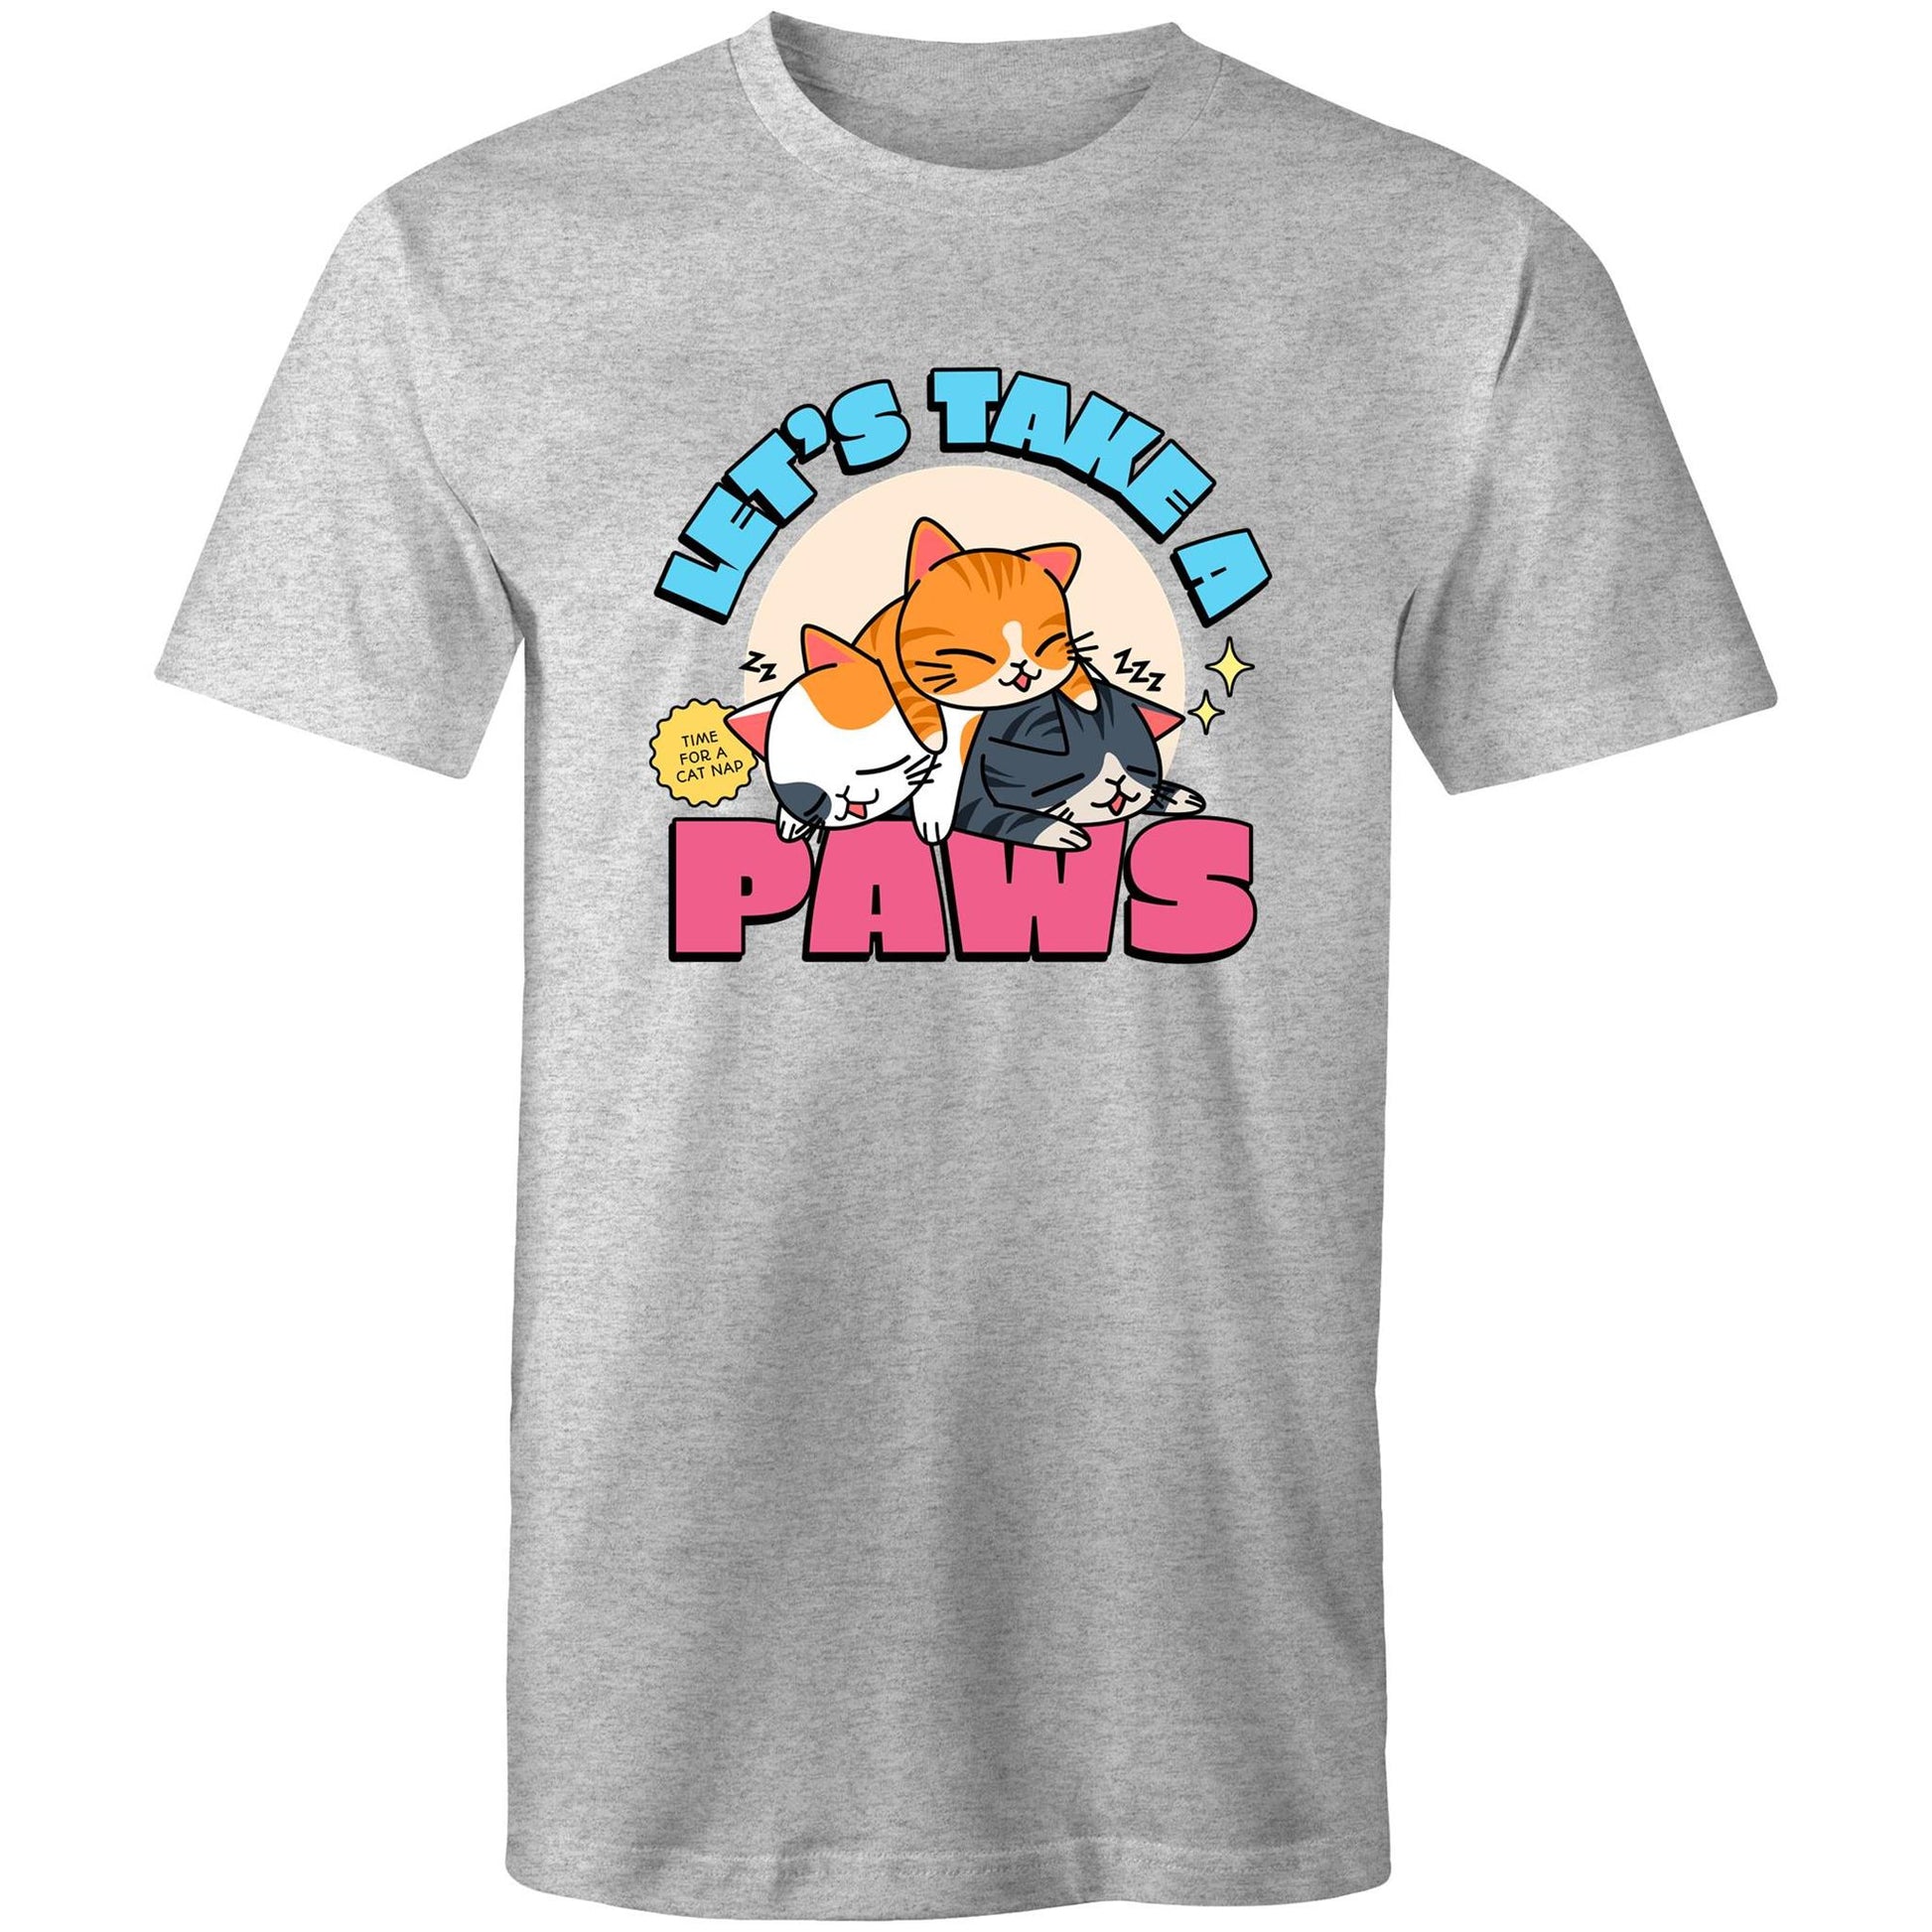 Let's Take A Paws, Time For A Cat Nap - Mens T-Shirt Grey Marle Mens T-shirt animal